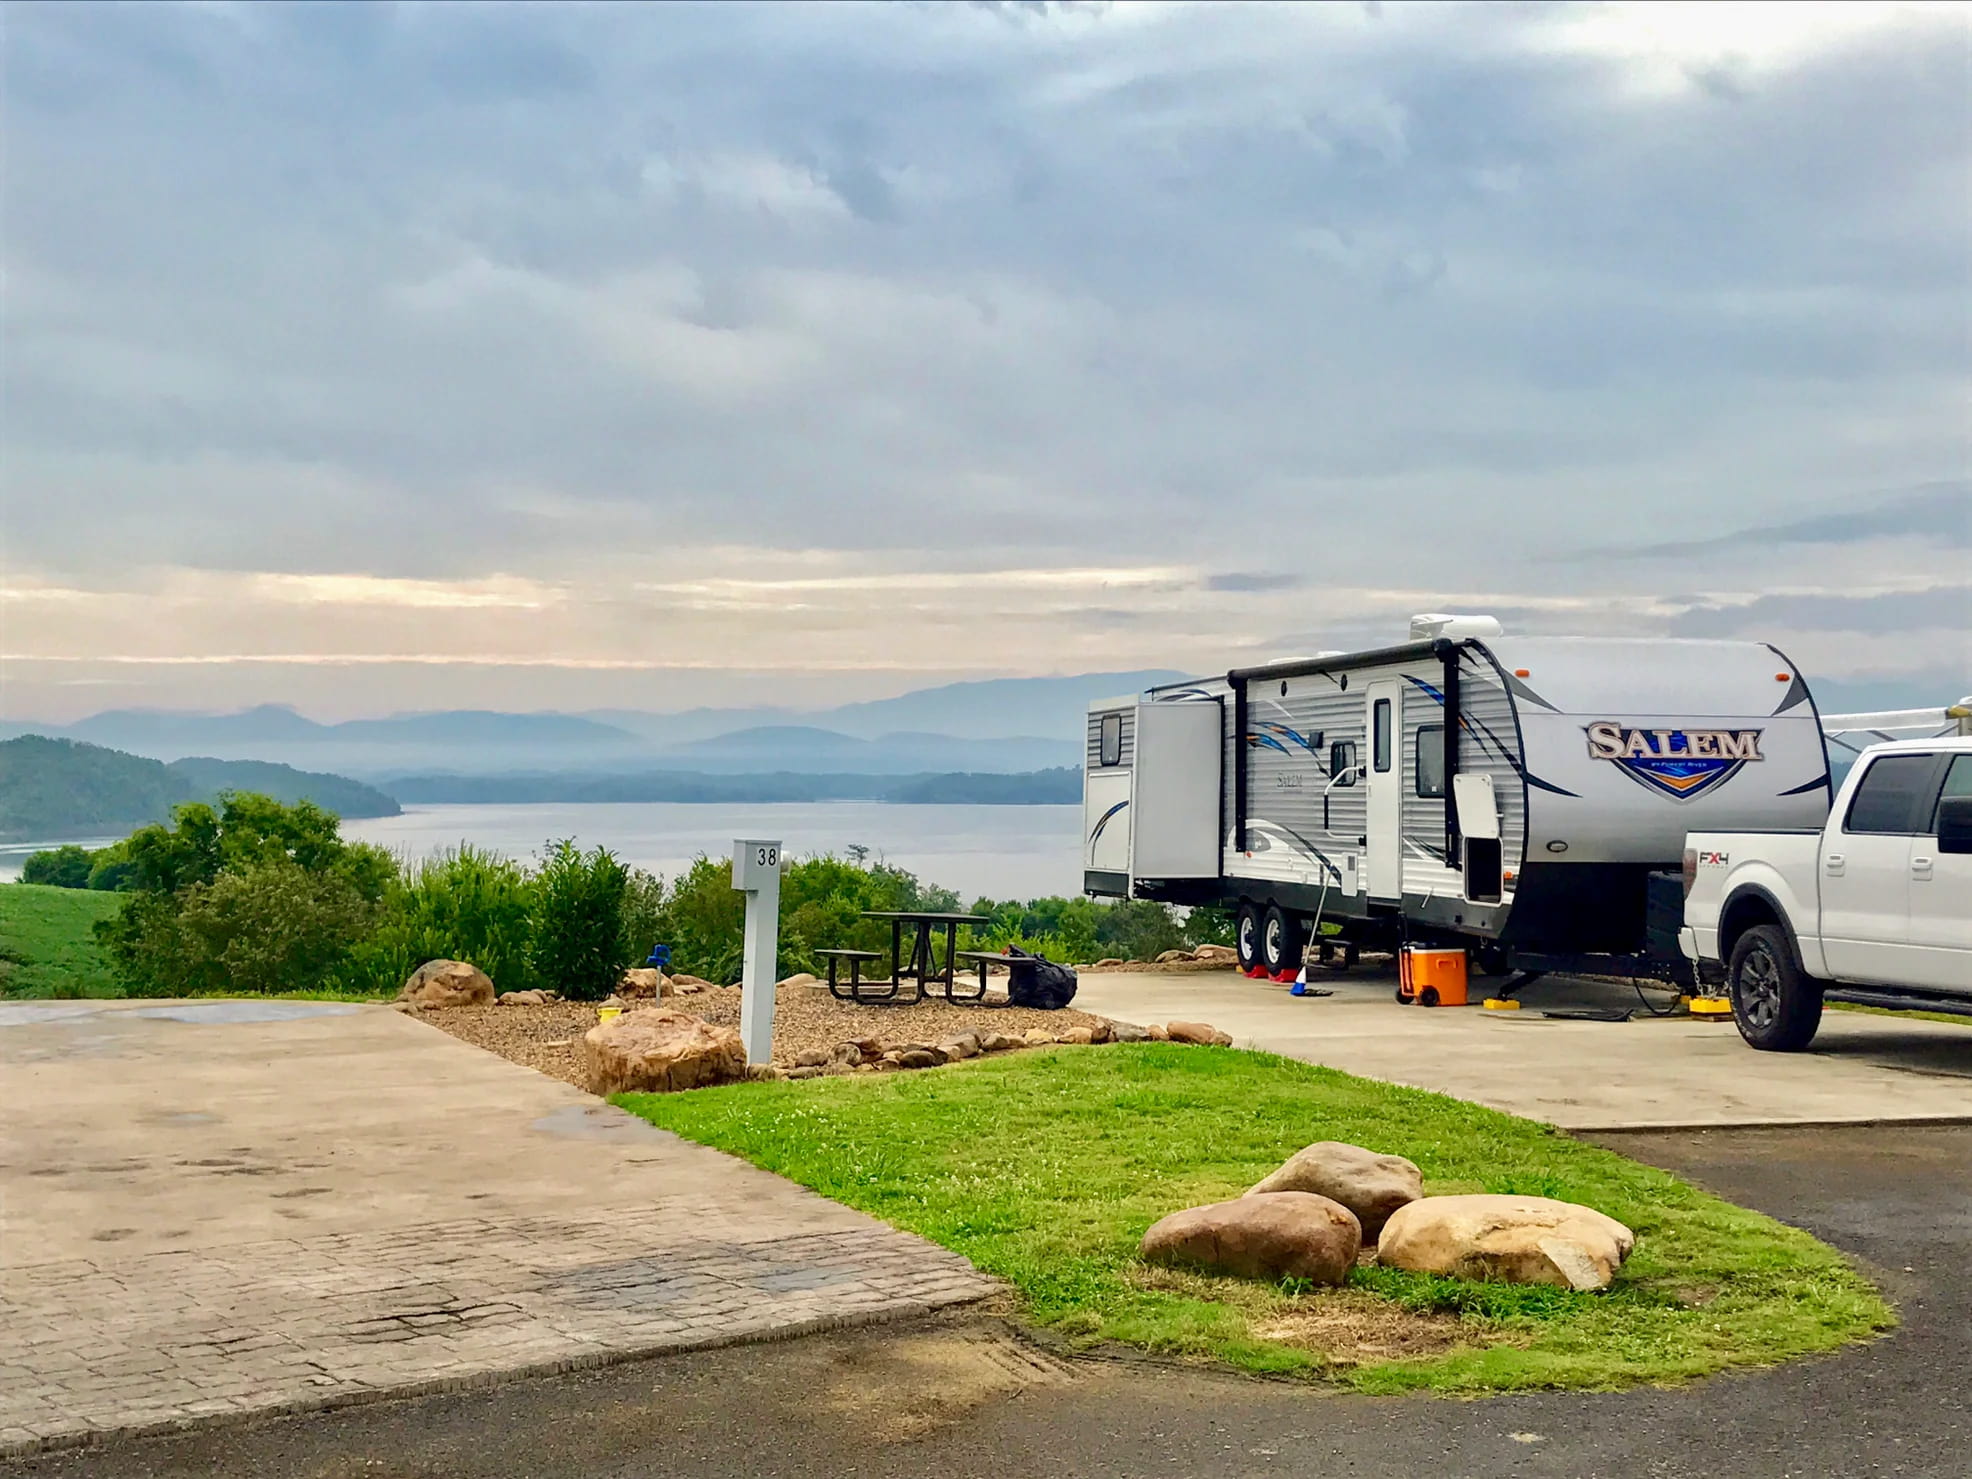 RV parked beside lake with mountains in the background.